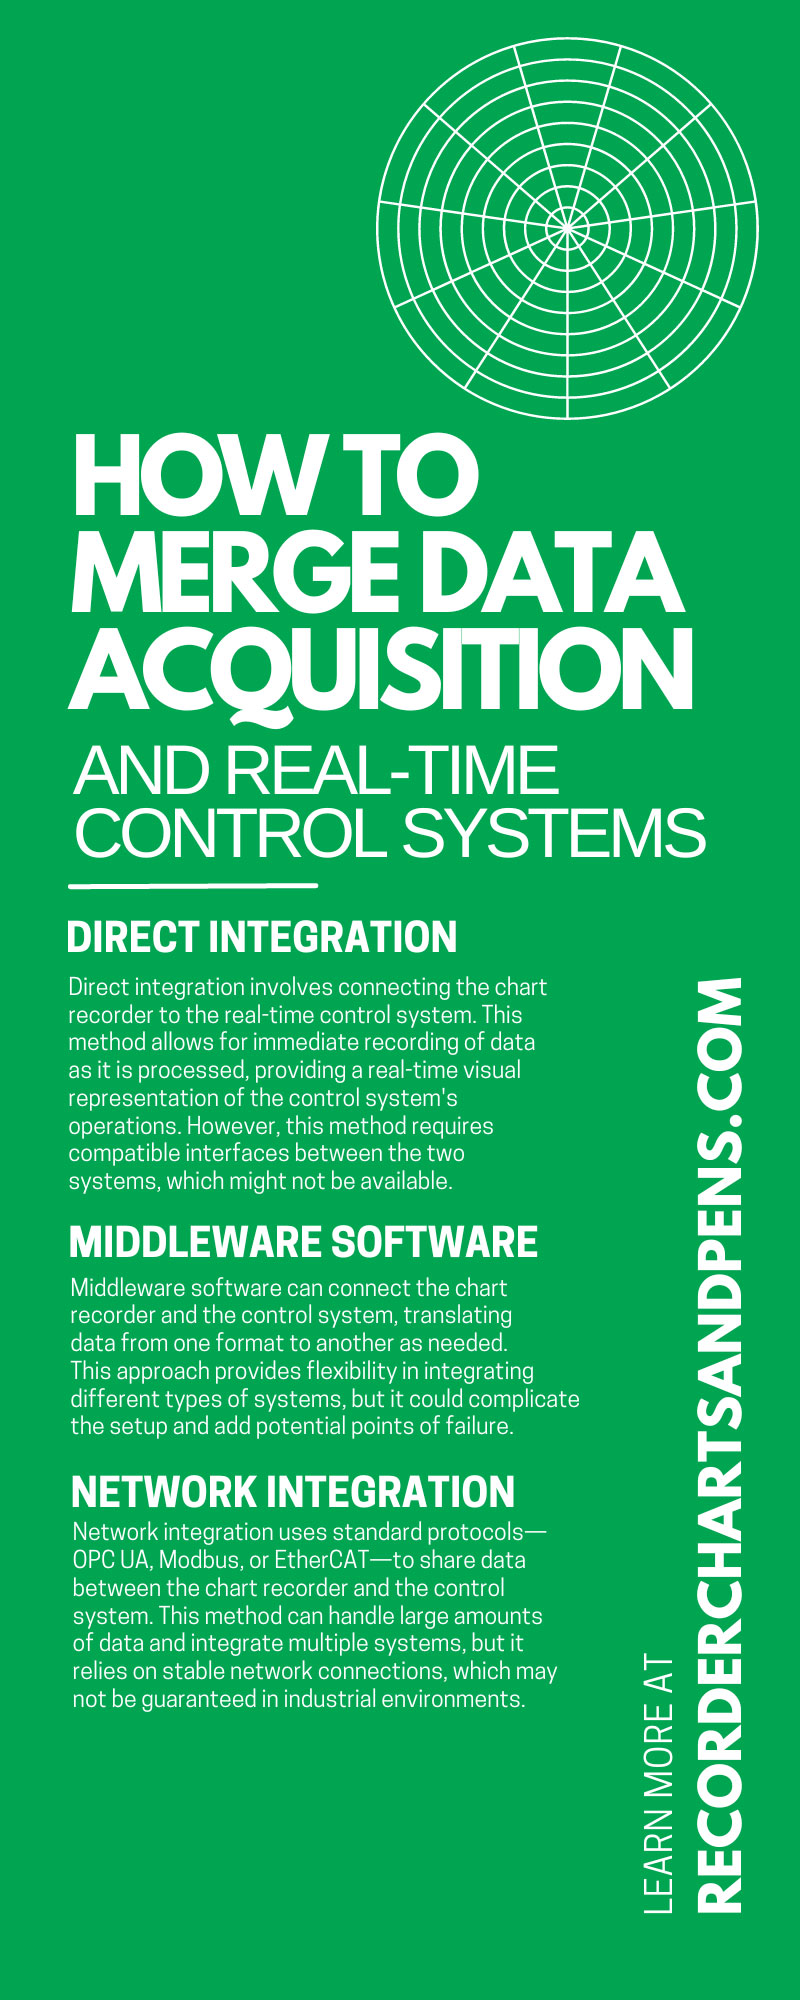 How To Merge Data Acquisition and Real-Time Control Systems